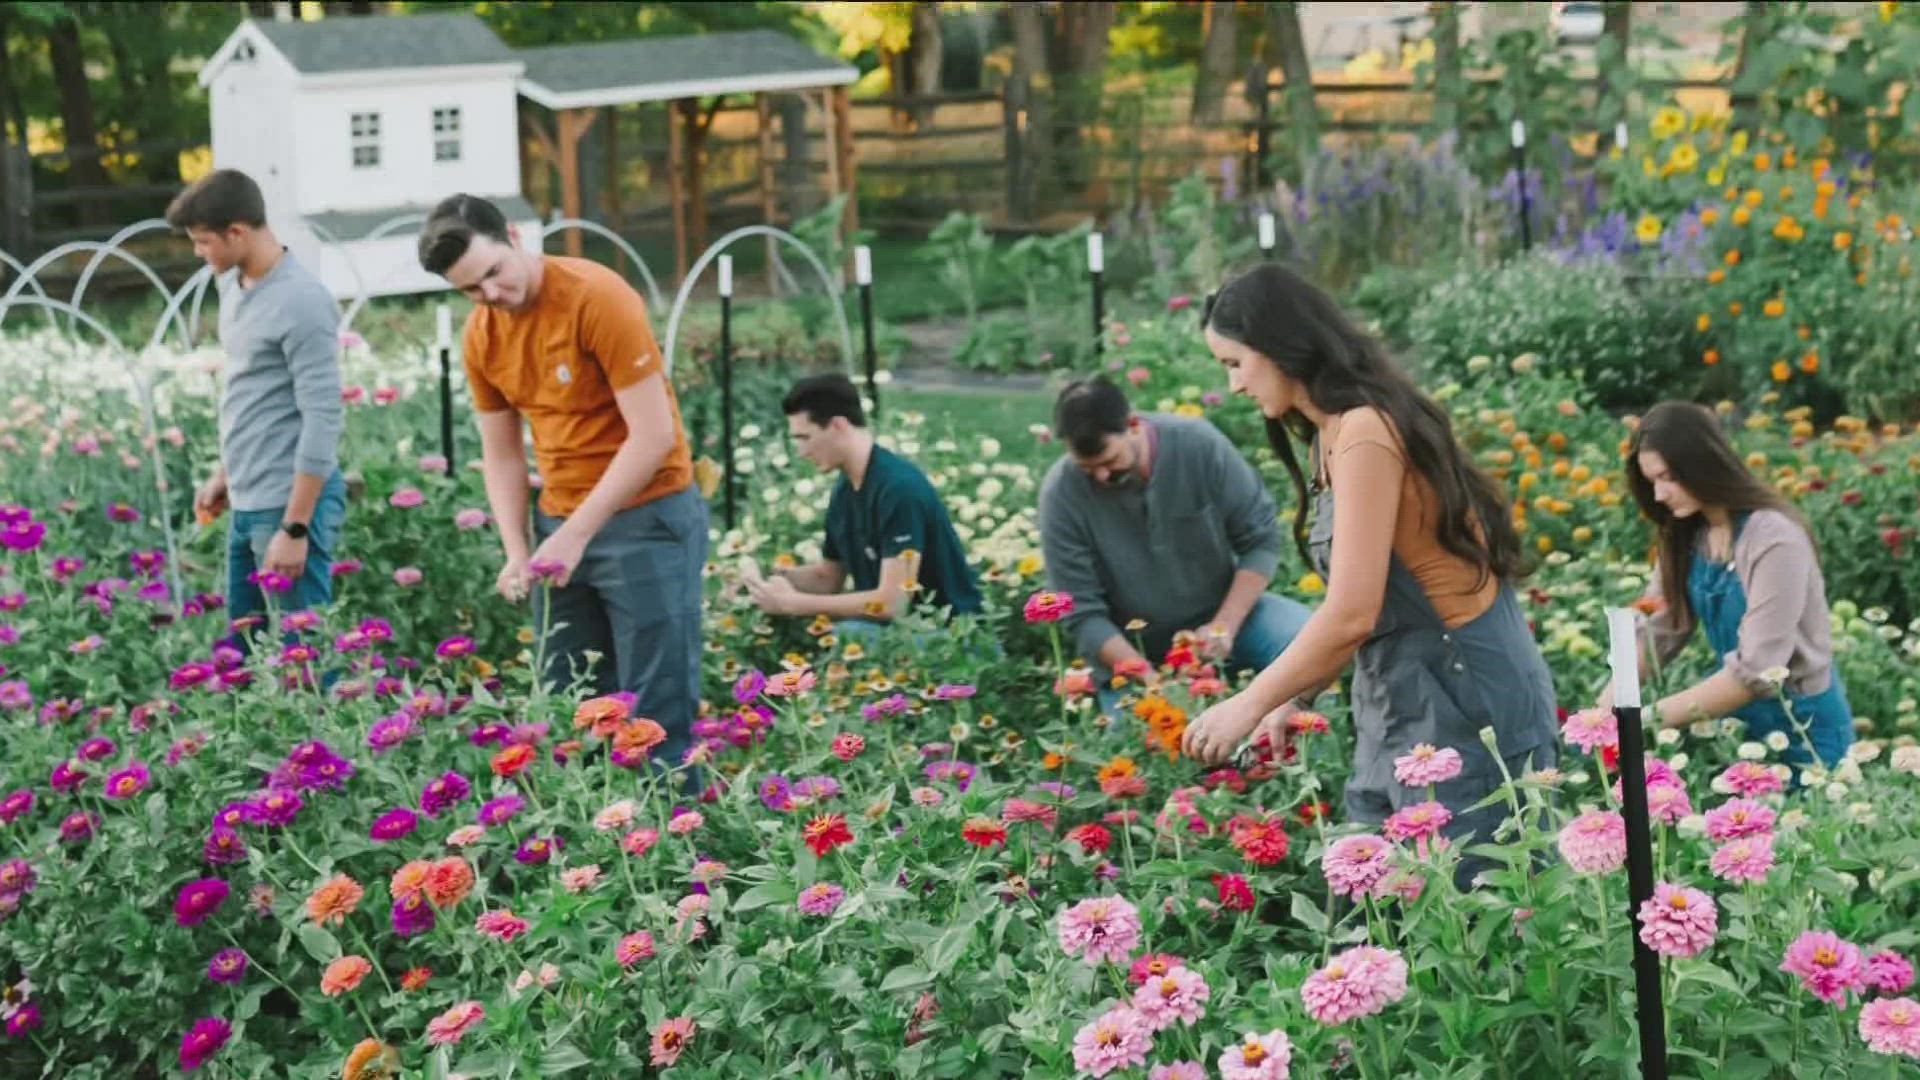 Tara McCallister developed a passion for beautifying her home landscape and with her family, turned her passion into a successful flower-growing business.